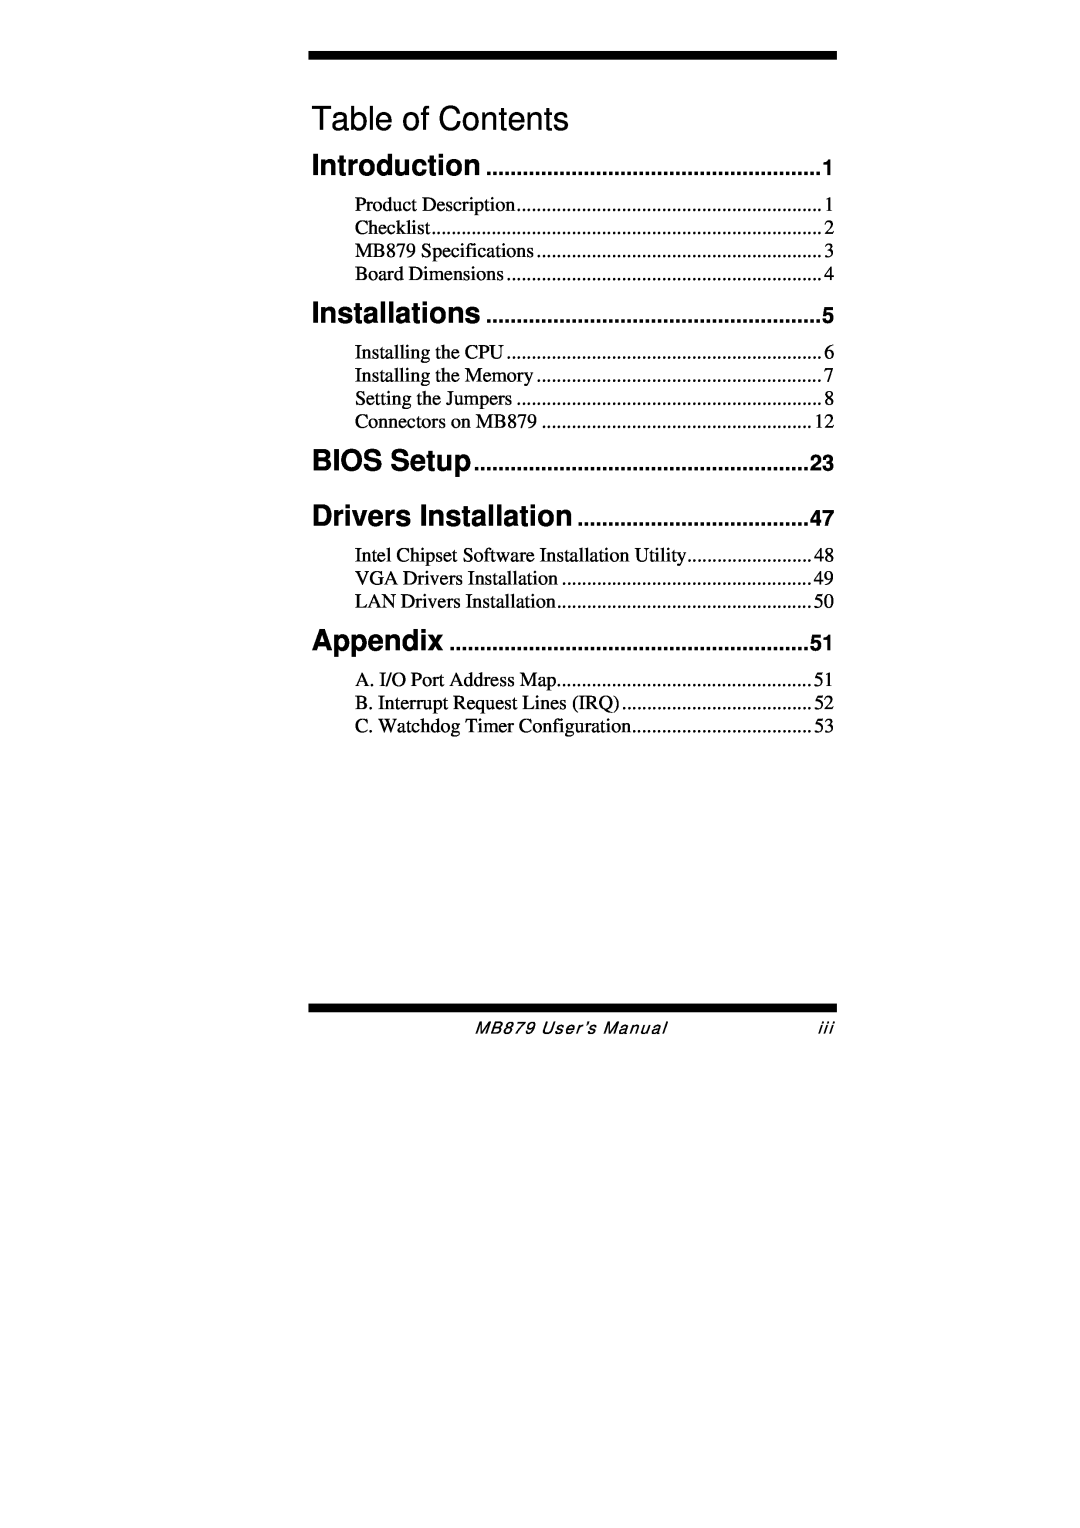 Intel MB879 user manual Introduction, Installations, BIOS Setup, Drivers Installation, Appendix, Table of Contents 